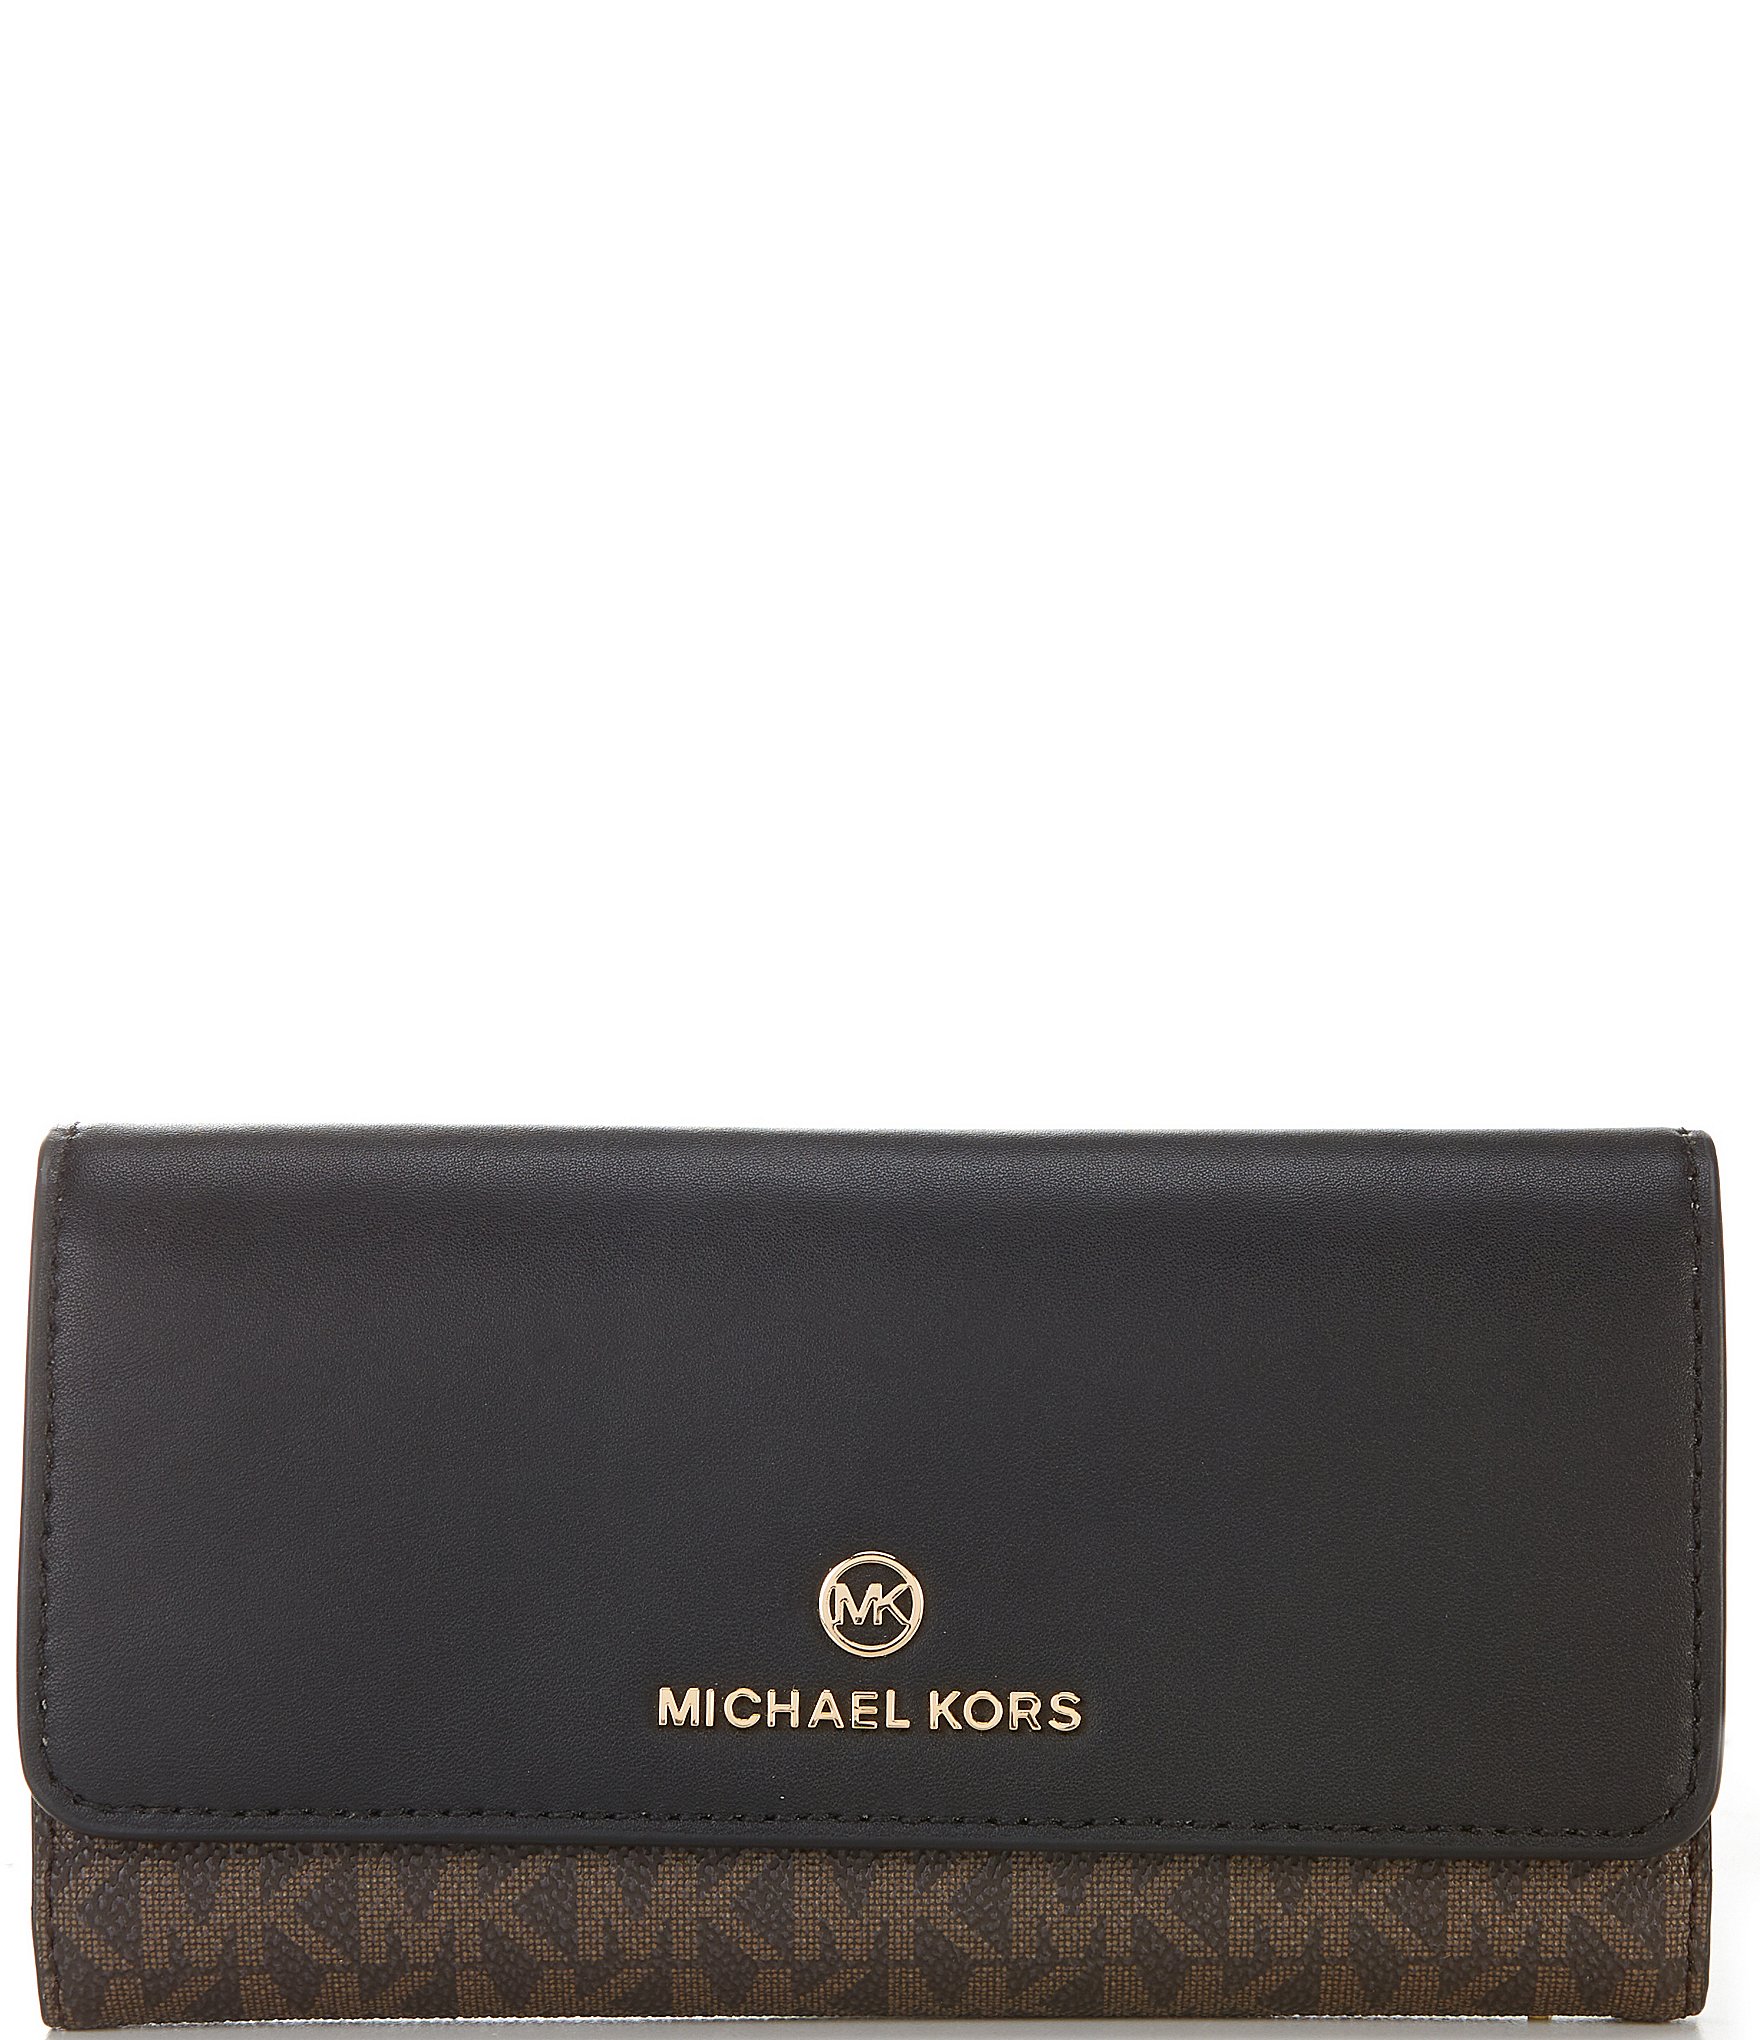 Michael Kors Jet Set Large Chain Tote Brown + Trifold Wallet